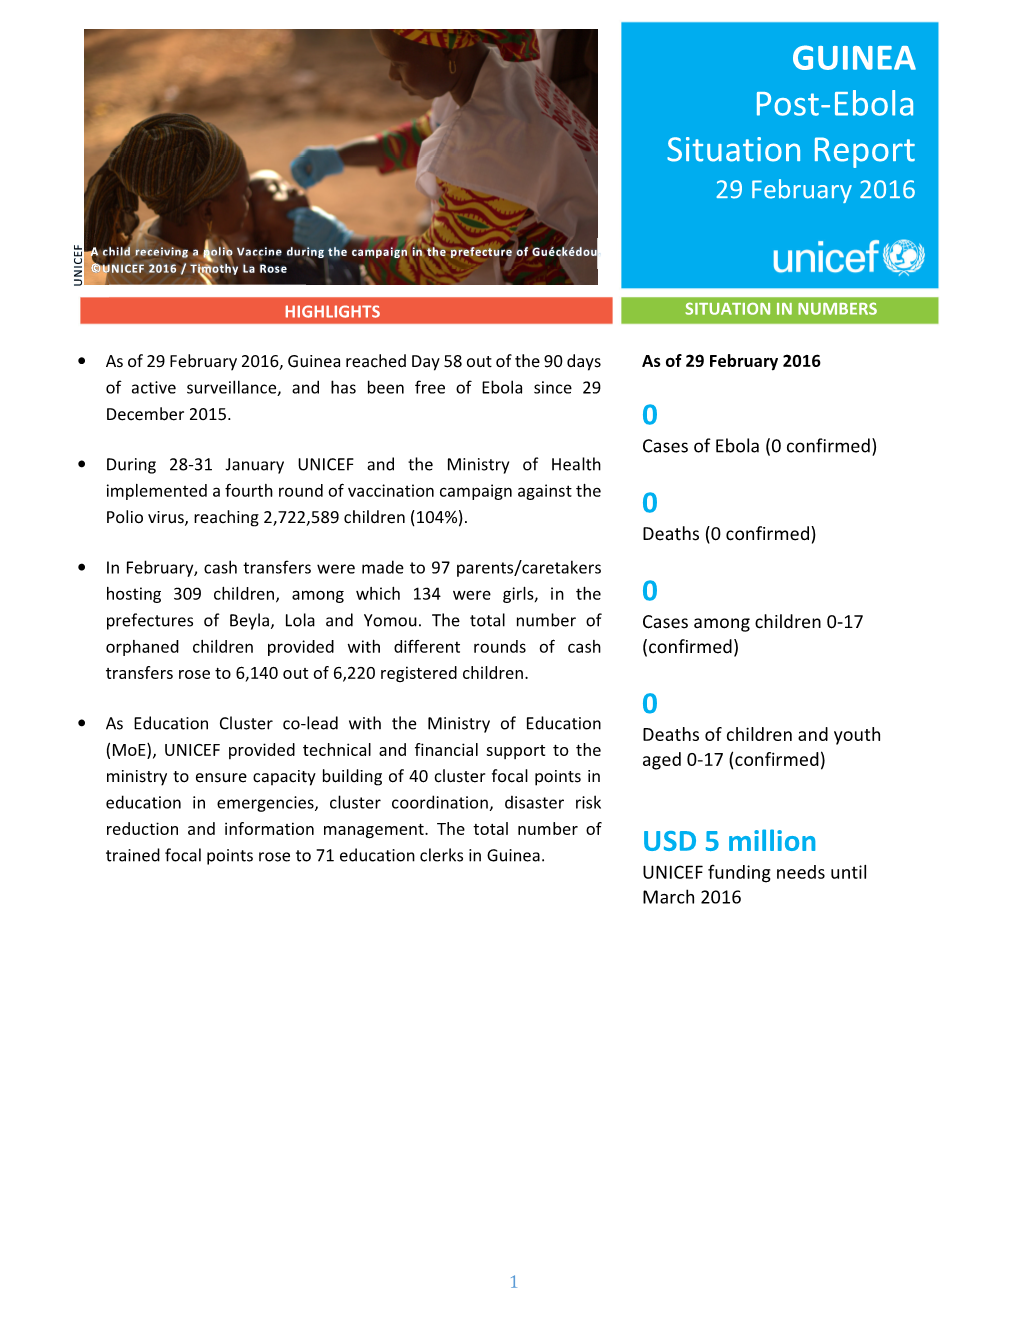 GUINEA Post-Ebola Situation Report